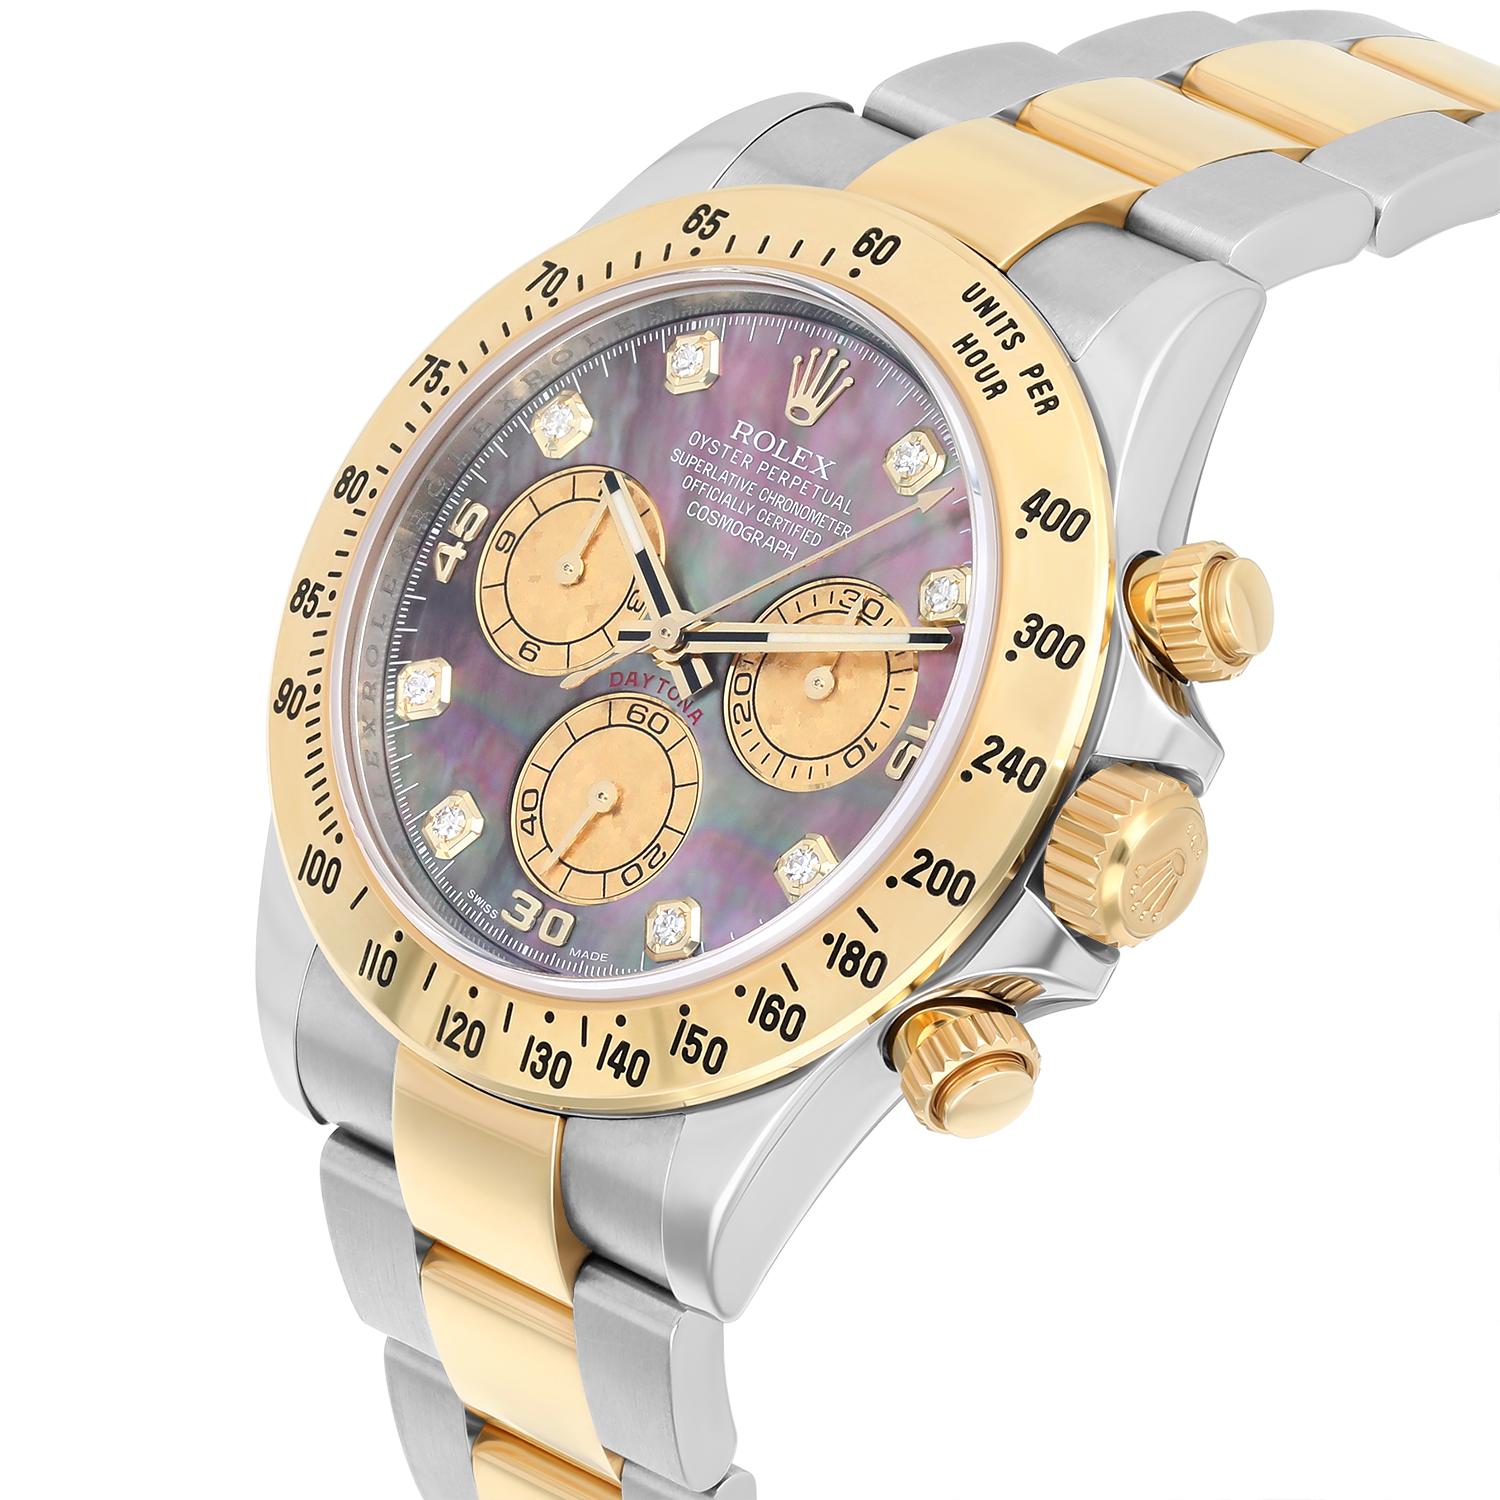 Rolex Daytona Yellow Gold & Steel Black Mother Of Pearl Diamond Dial 116523 B/P For Sale 1